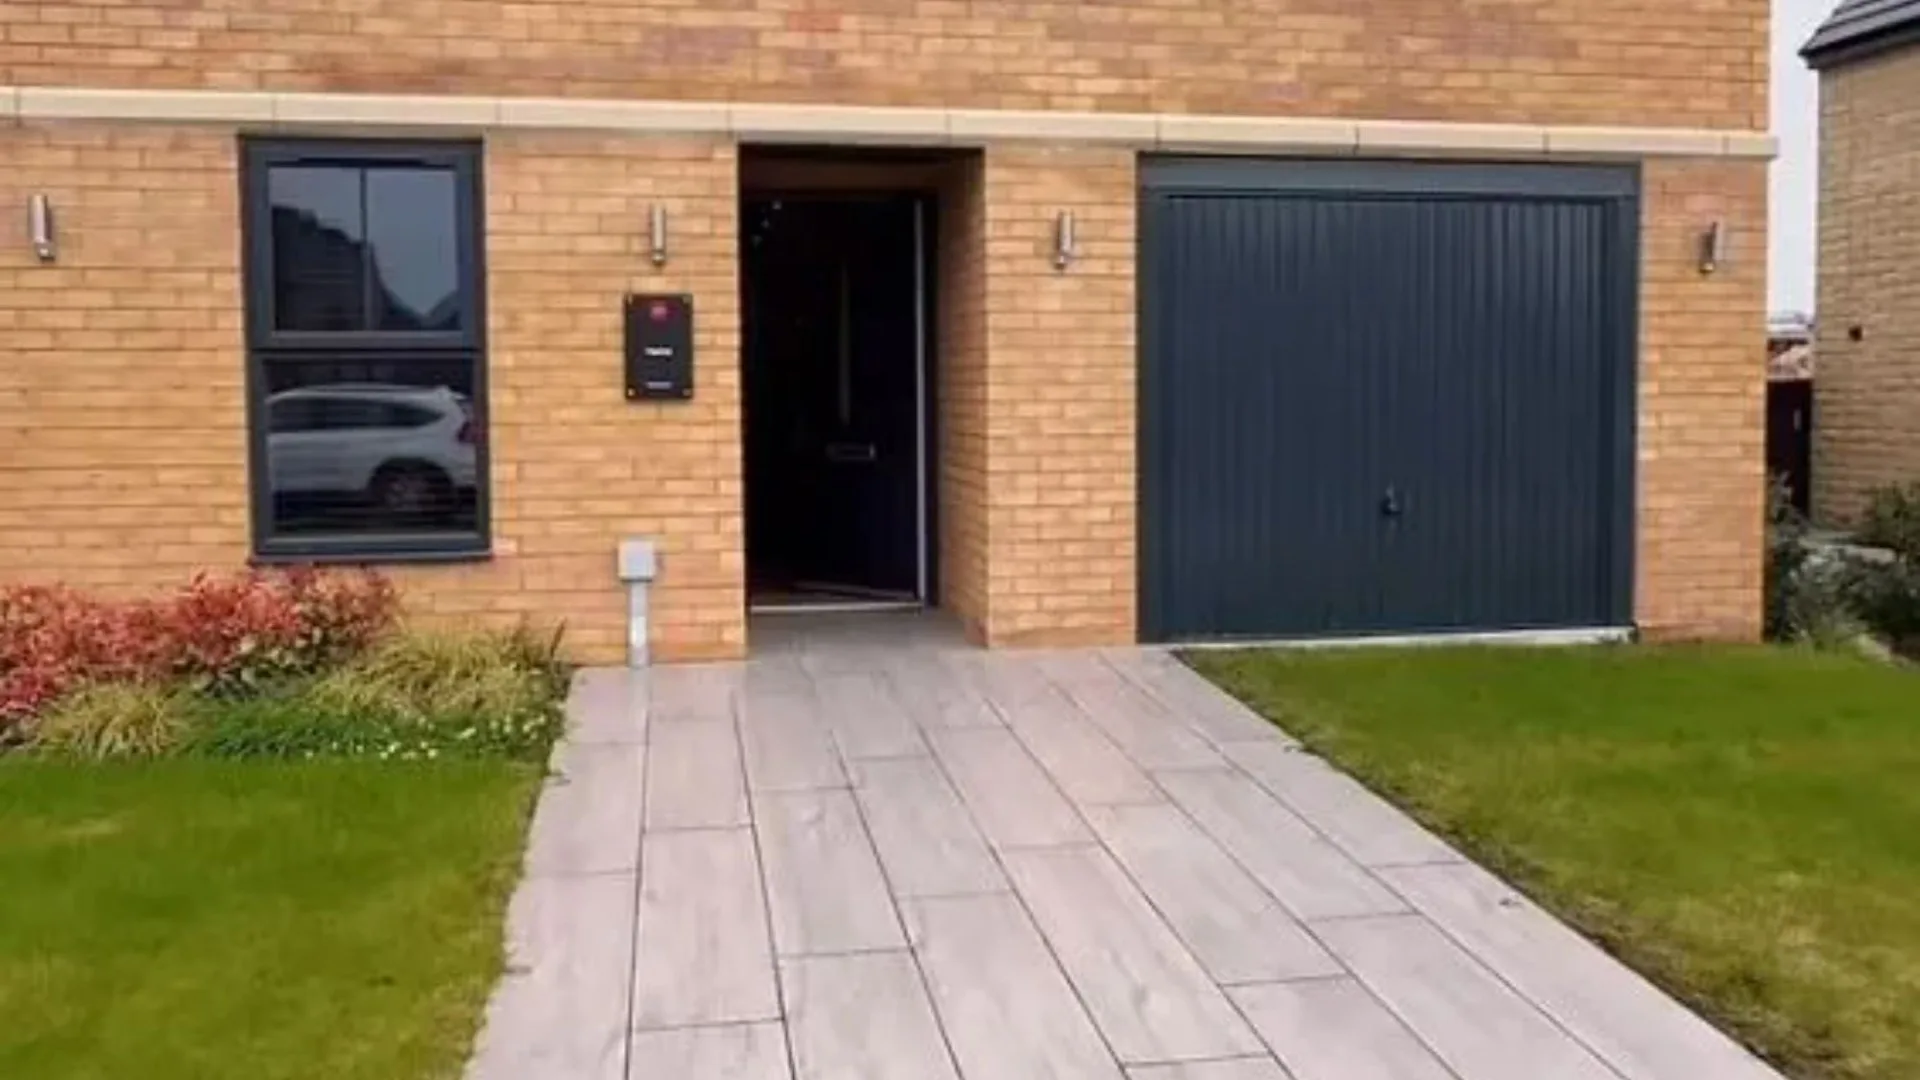 Newbuild home goes viral over over crucial design error in front garden – see if you can spot it